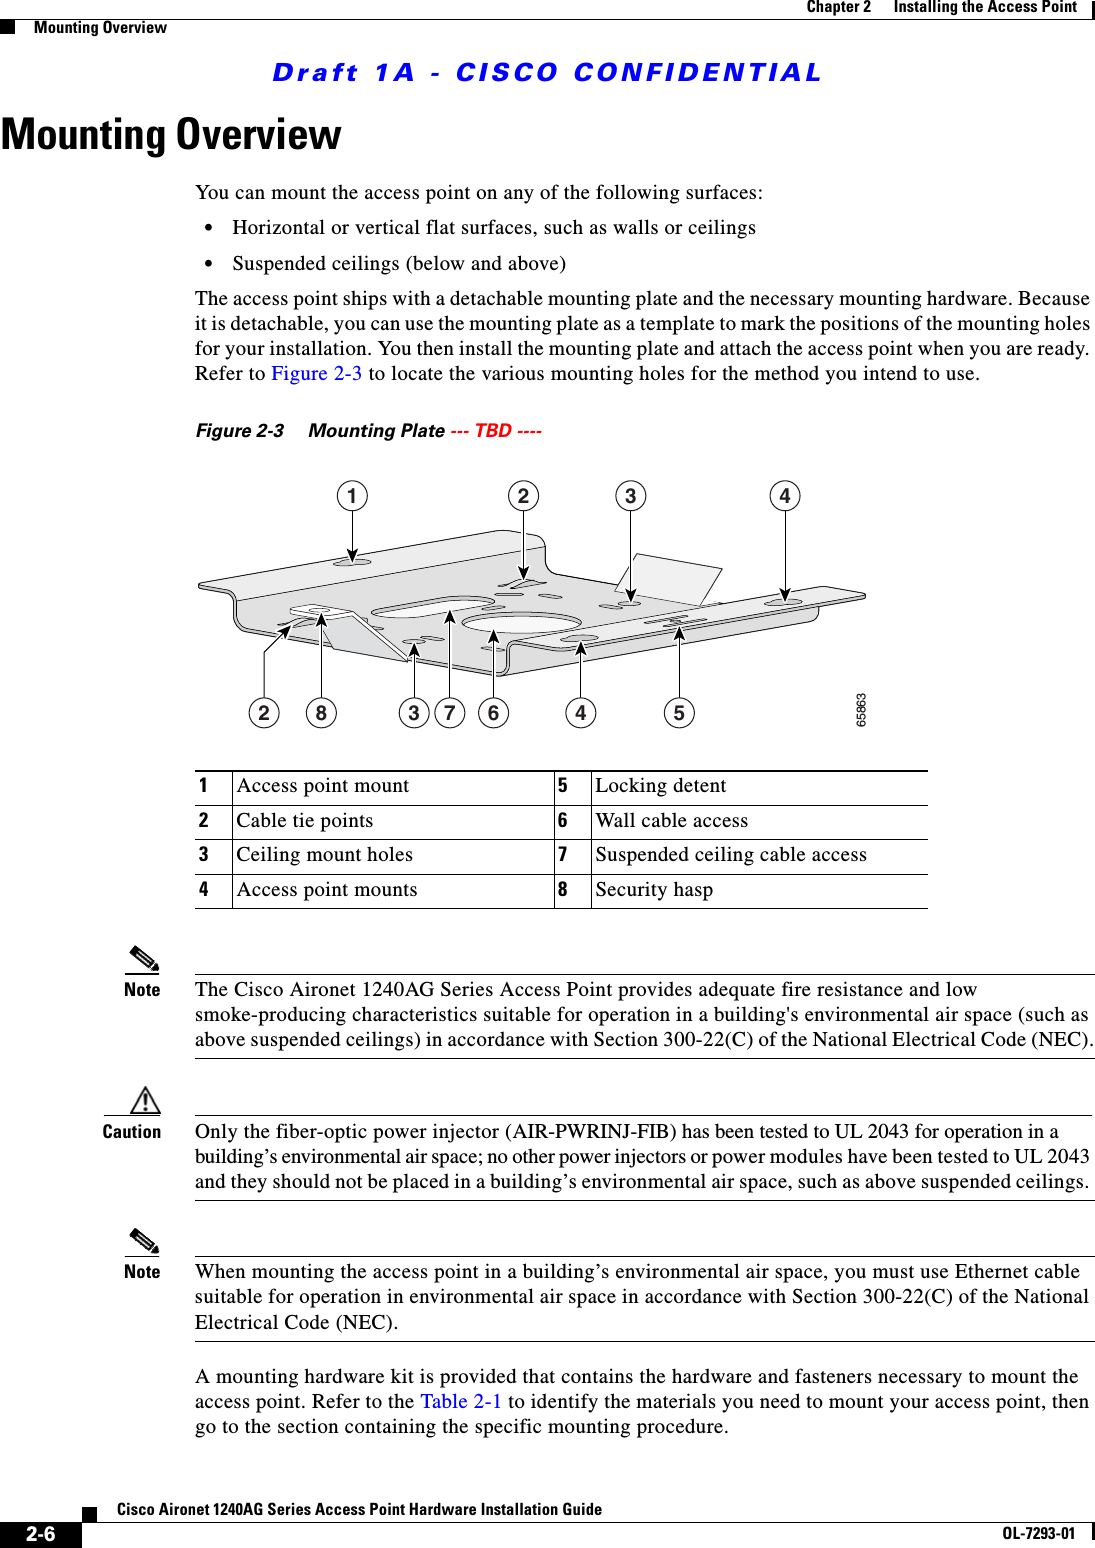 Draft 1A - CISCO CONFIDENTIAL2-6Cisco Aironet 1240AG Series Access Point Hardware Installation GuideOL-7293-01Chapter 2      Installing the Access PointMounting OverviewMounting OverviewYou can mount the access point on any of the following surfaces:•Horizontal or vertical flat surfaces, such as walls or ceilings•Suspended ceilings (below and above)The access point ships with a detachable mounting plate and the necessary mounting hardware. Because it is detachable, you can use the mounting plate as a template to mark the positions of the mounting holes for your installation. You then install the mounting plate and attach the access point when you are ready. Refer to Figure 2-3 to locate the various mounting holes for the method you intend to use.Figure 2-3 Mounting Plate --- TBD ---- Note The Cisco Aironet 1240AG Series Access Point provides adequate fire resistance and low smoke-producing characteristics suitable for operation in a building&apos;s environmental air space (such as above suspended ceilings) in accordance with Section 300-22(C) of the National Electrical Code (NEC).Caution Only the fiber-optic power injector (AIR-PWRINJ-FIB) has been tested to UL 2043 for operation in a building’s environmental air space; no other power injectors or power modules have been tested to UL 2043 and they should not be placed in a building’s environmental air space, such as above suspended ceilings. Note When mounting the access point in a building’s environmental air space, you must use Ethernet cable suitable for operation in environmental air space in accordance with Section 300-22(C) of the National Electrical Code (NEC).A mounting hardware kit is provided that contains the hardware and fasteners necessary to mount the access point. Refer to the Table 2-1 to identify the materials you need to mount your access point, then go to the section containing the specific mounting procedure.1Access point mount 5Locking detent2Cable tie points 6Wall cable access3Ceiling mount holes 7Suspended ceiling cable access4Access point mounts 8Security hasp15467382 3 4658632